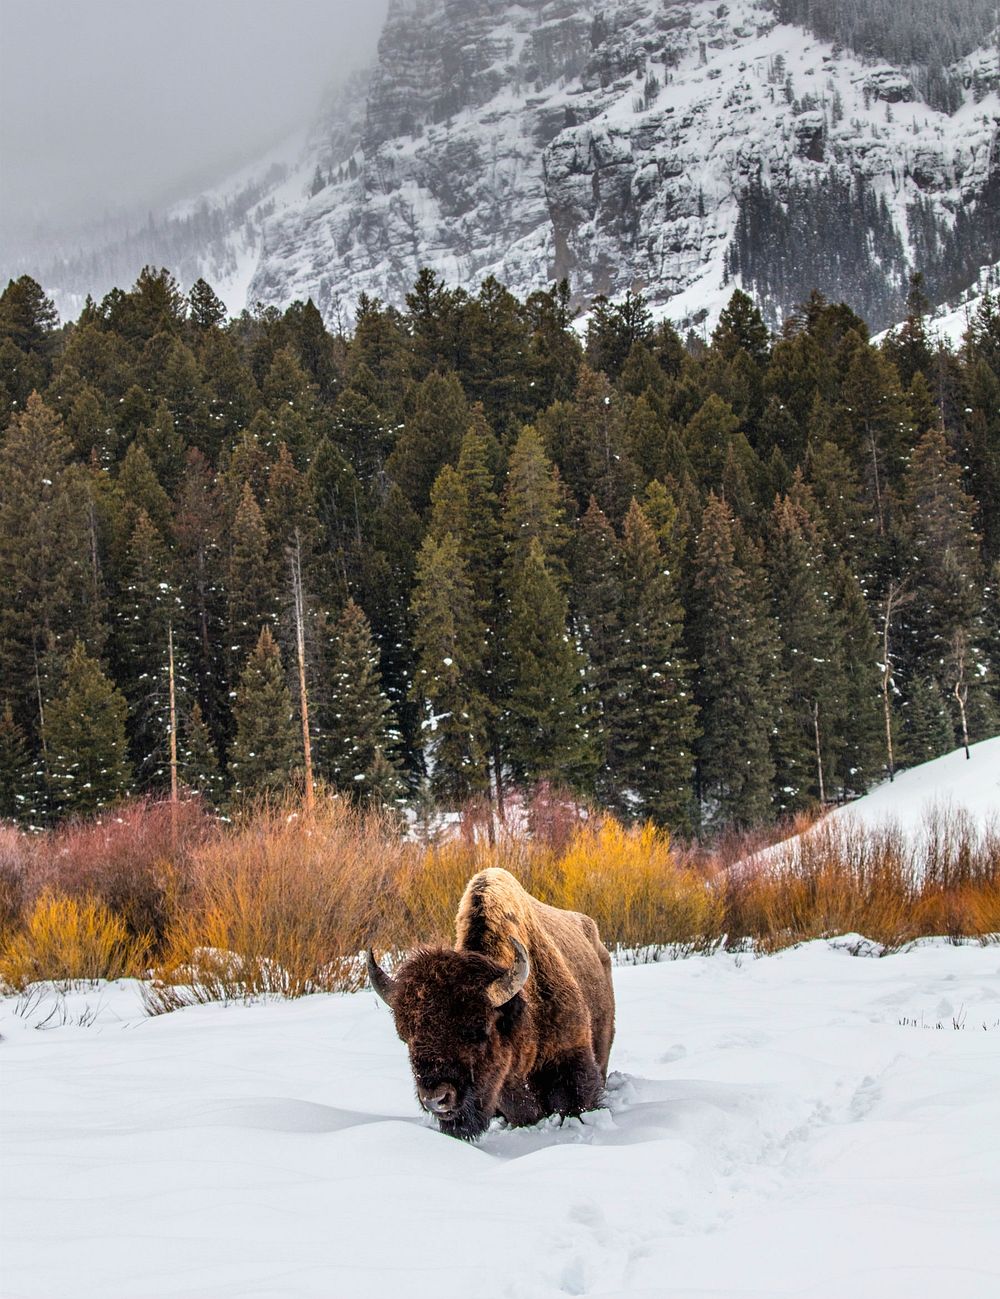 Bison in snowy Yellowstone national park, USA. Original public domain image from Flickr